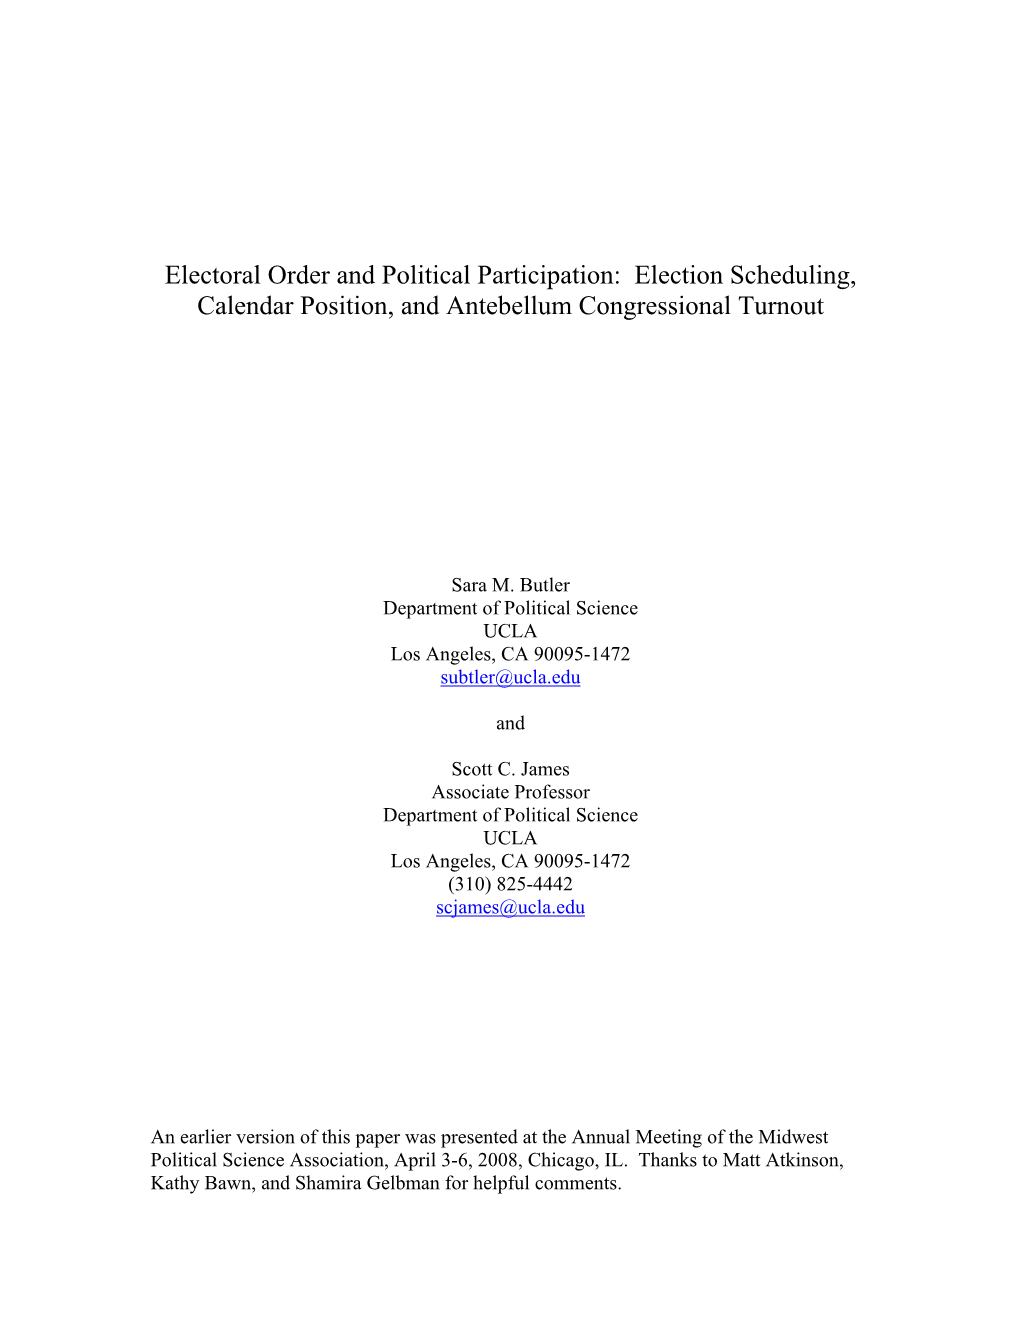 Electoral Order and Political Participation: Election Scheduling, Calendar Position, and Antebellum Congressional Turnout